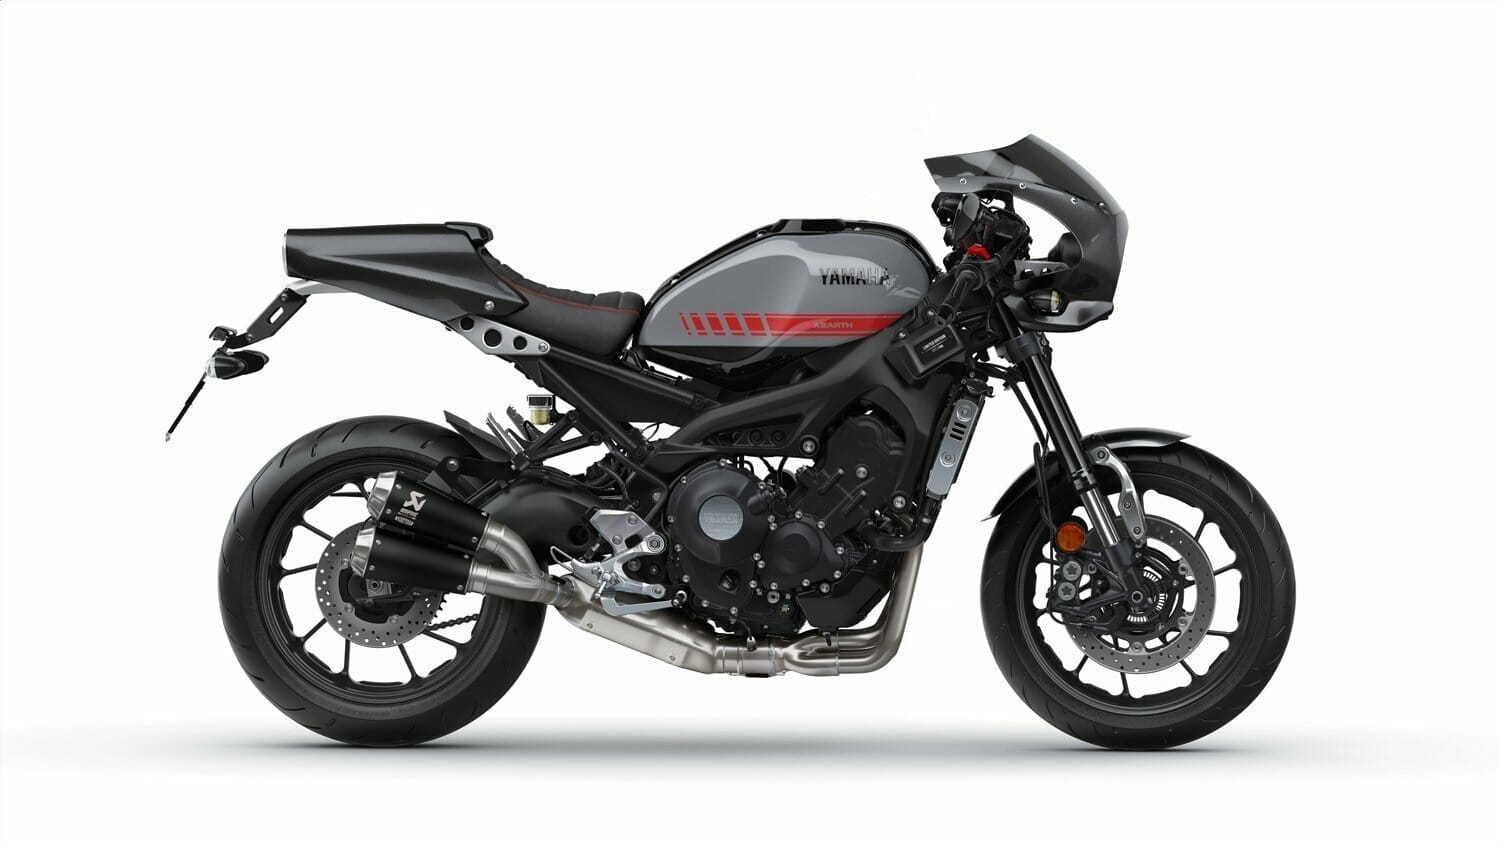 Yamaha XSR900 Abarth – Pictures